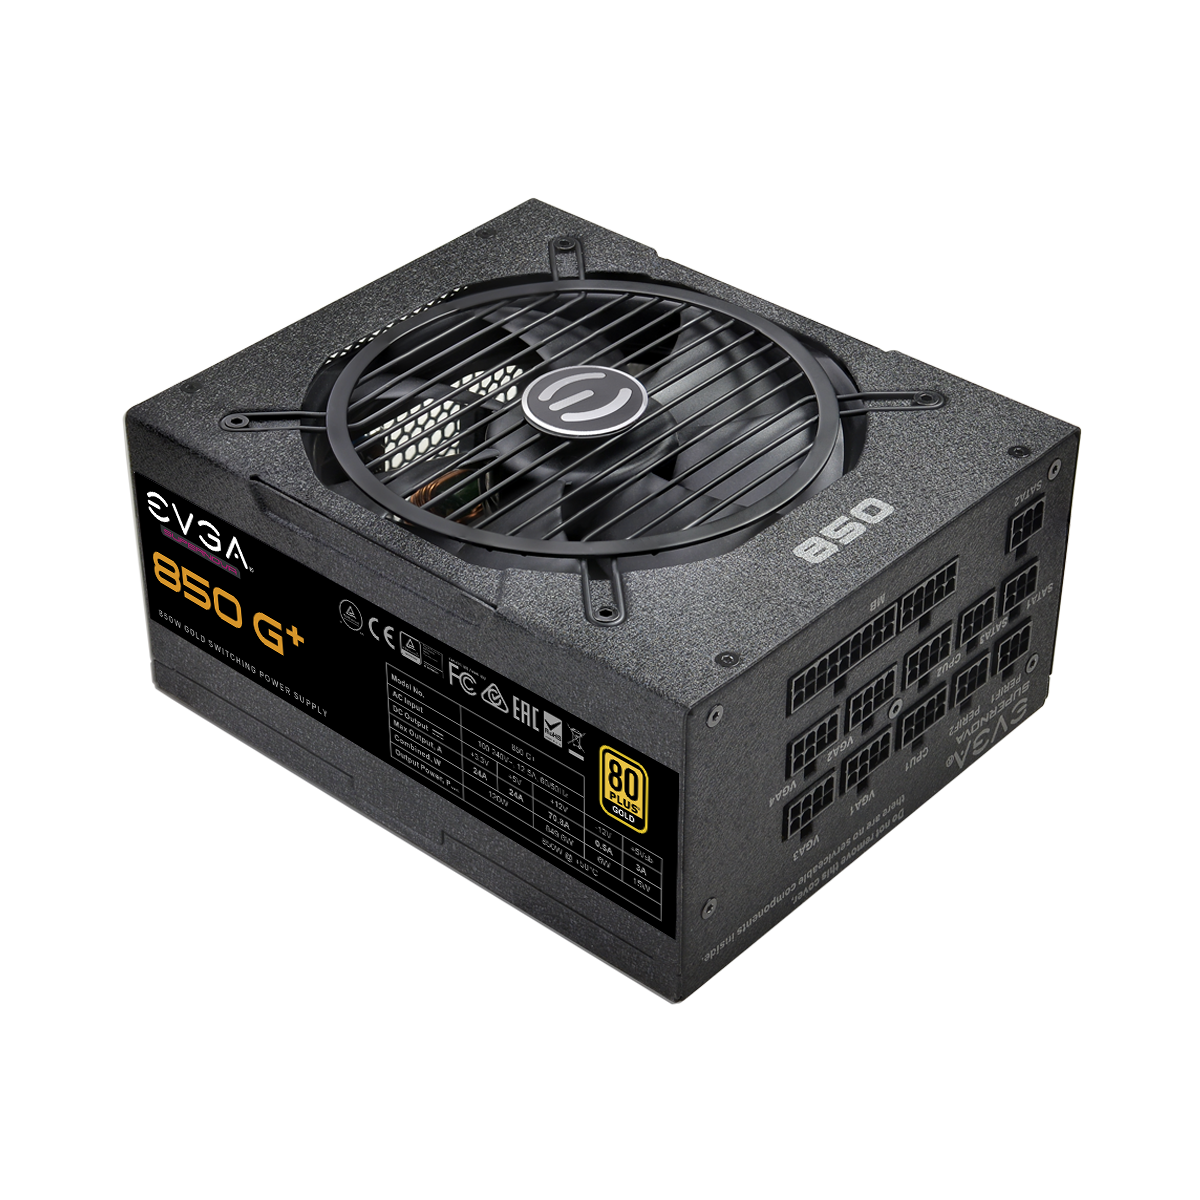 EVGA - Products - EVGA SuperNOVA 850 G5, 80 Plus Gold 850W, Fully Modular,  Eco Mode with FDB Fan, 10 Year Warranty, Includes Power ON Self Tester,  Compact 150mm Size, Power Supply 220-G5-0850-X1 - 220-G5-0850-X1